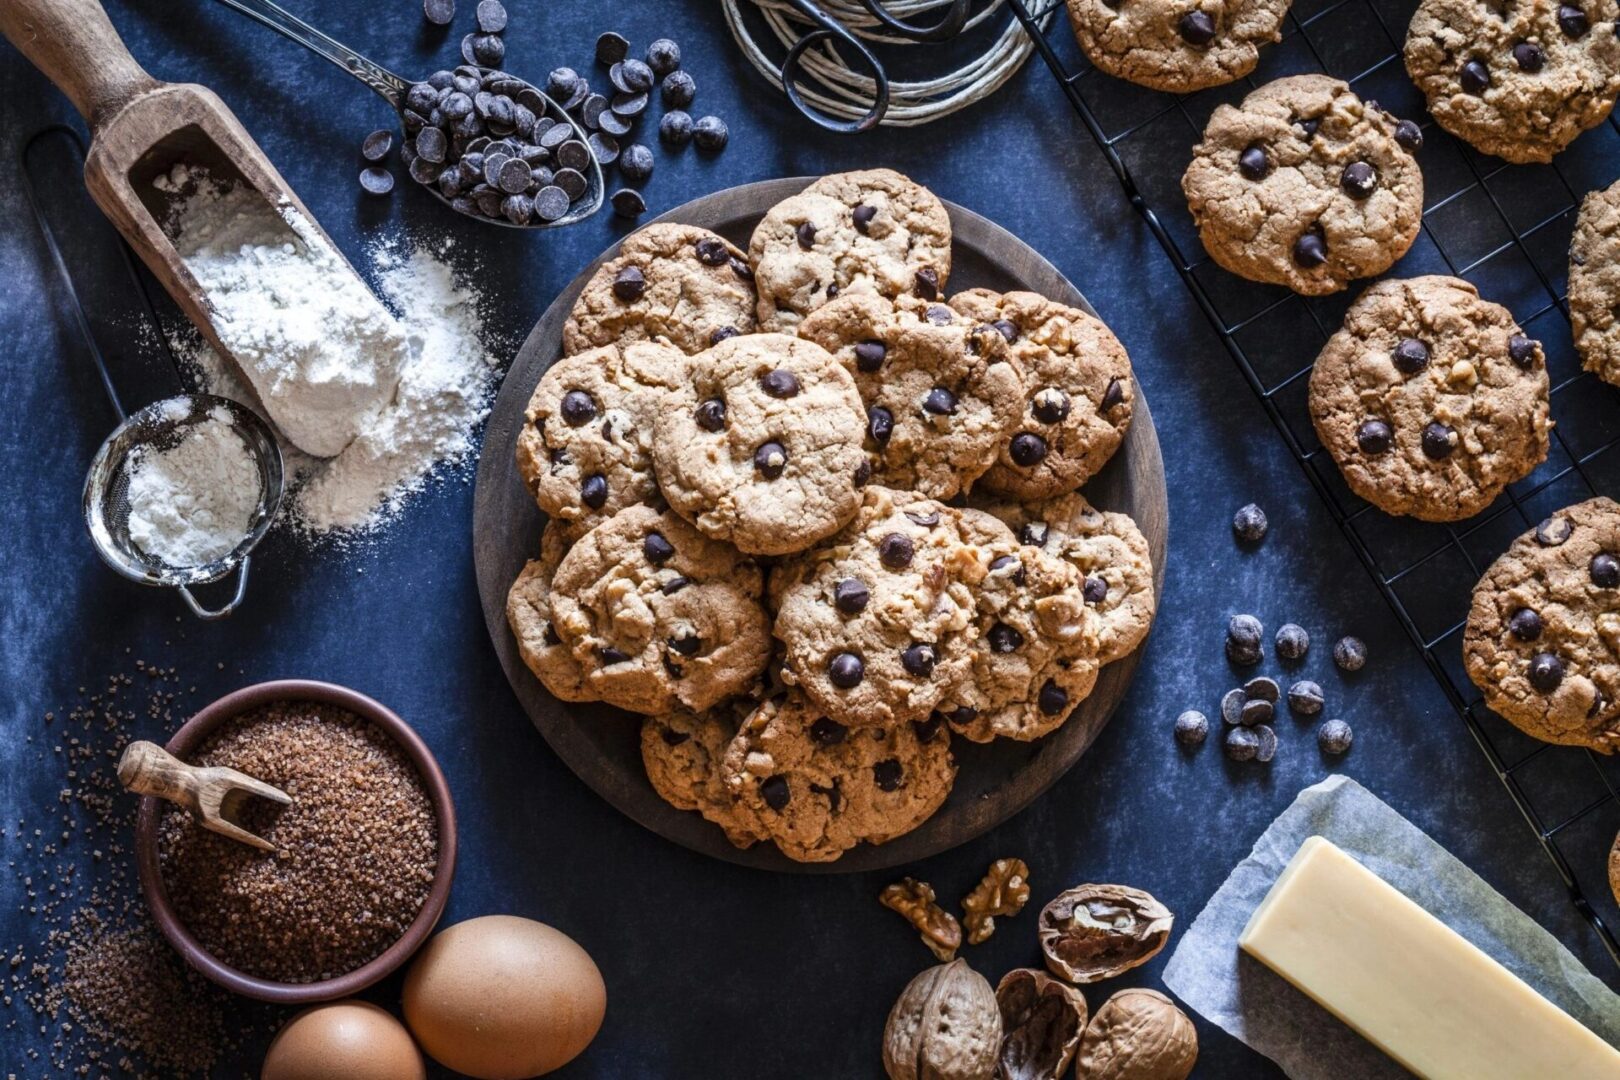 A plate of cookies on the table with other ingredients.